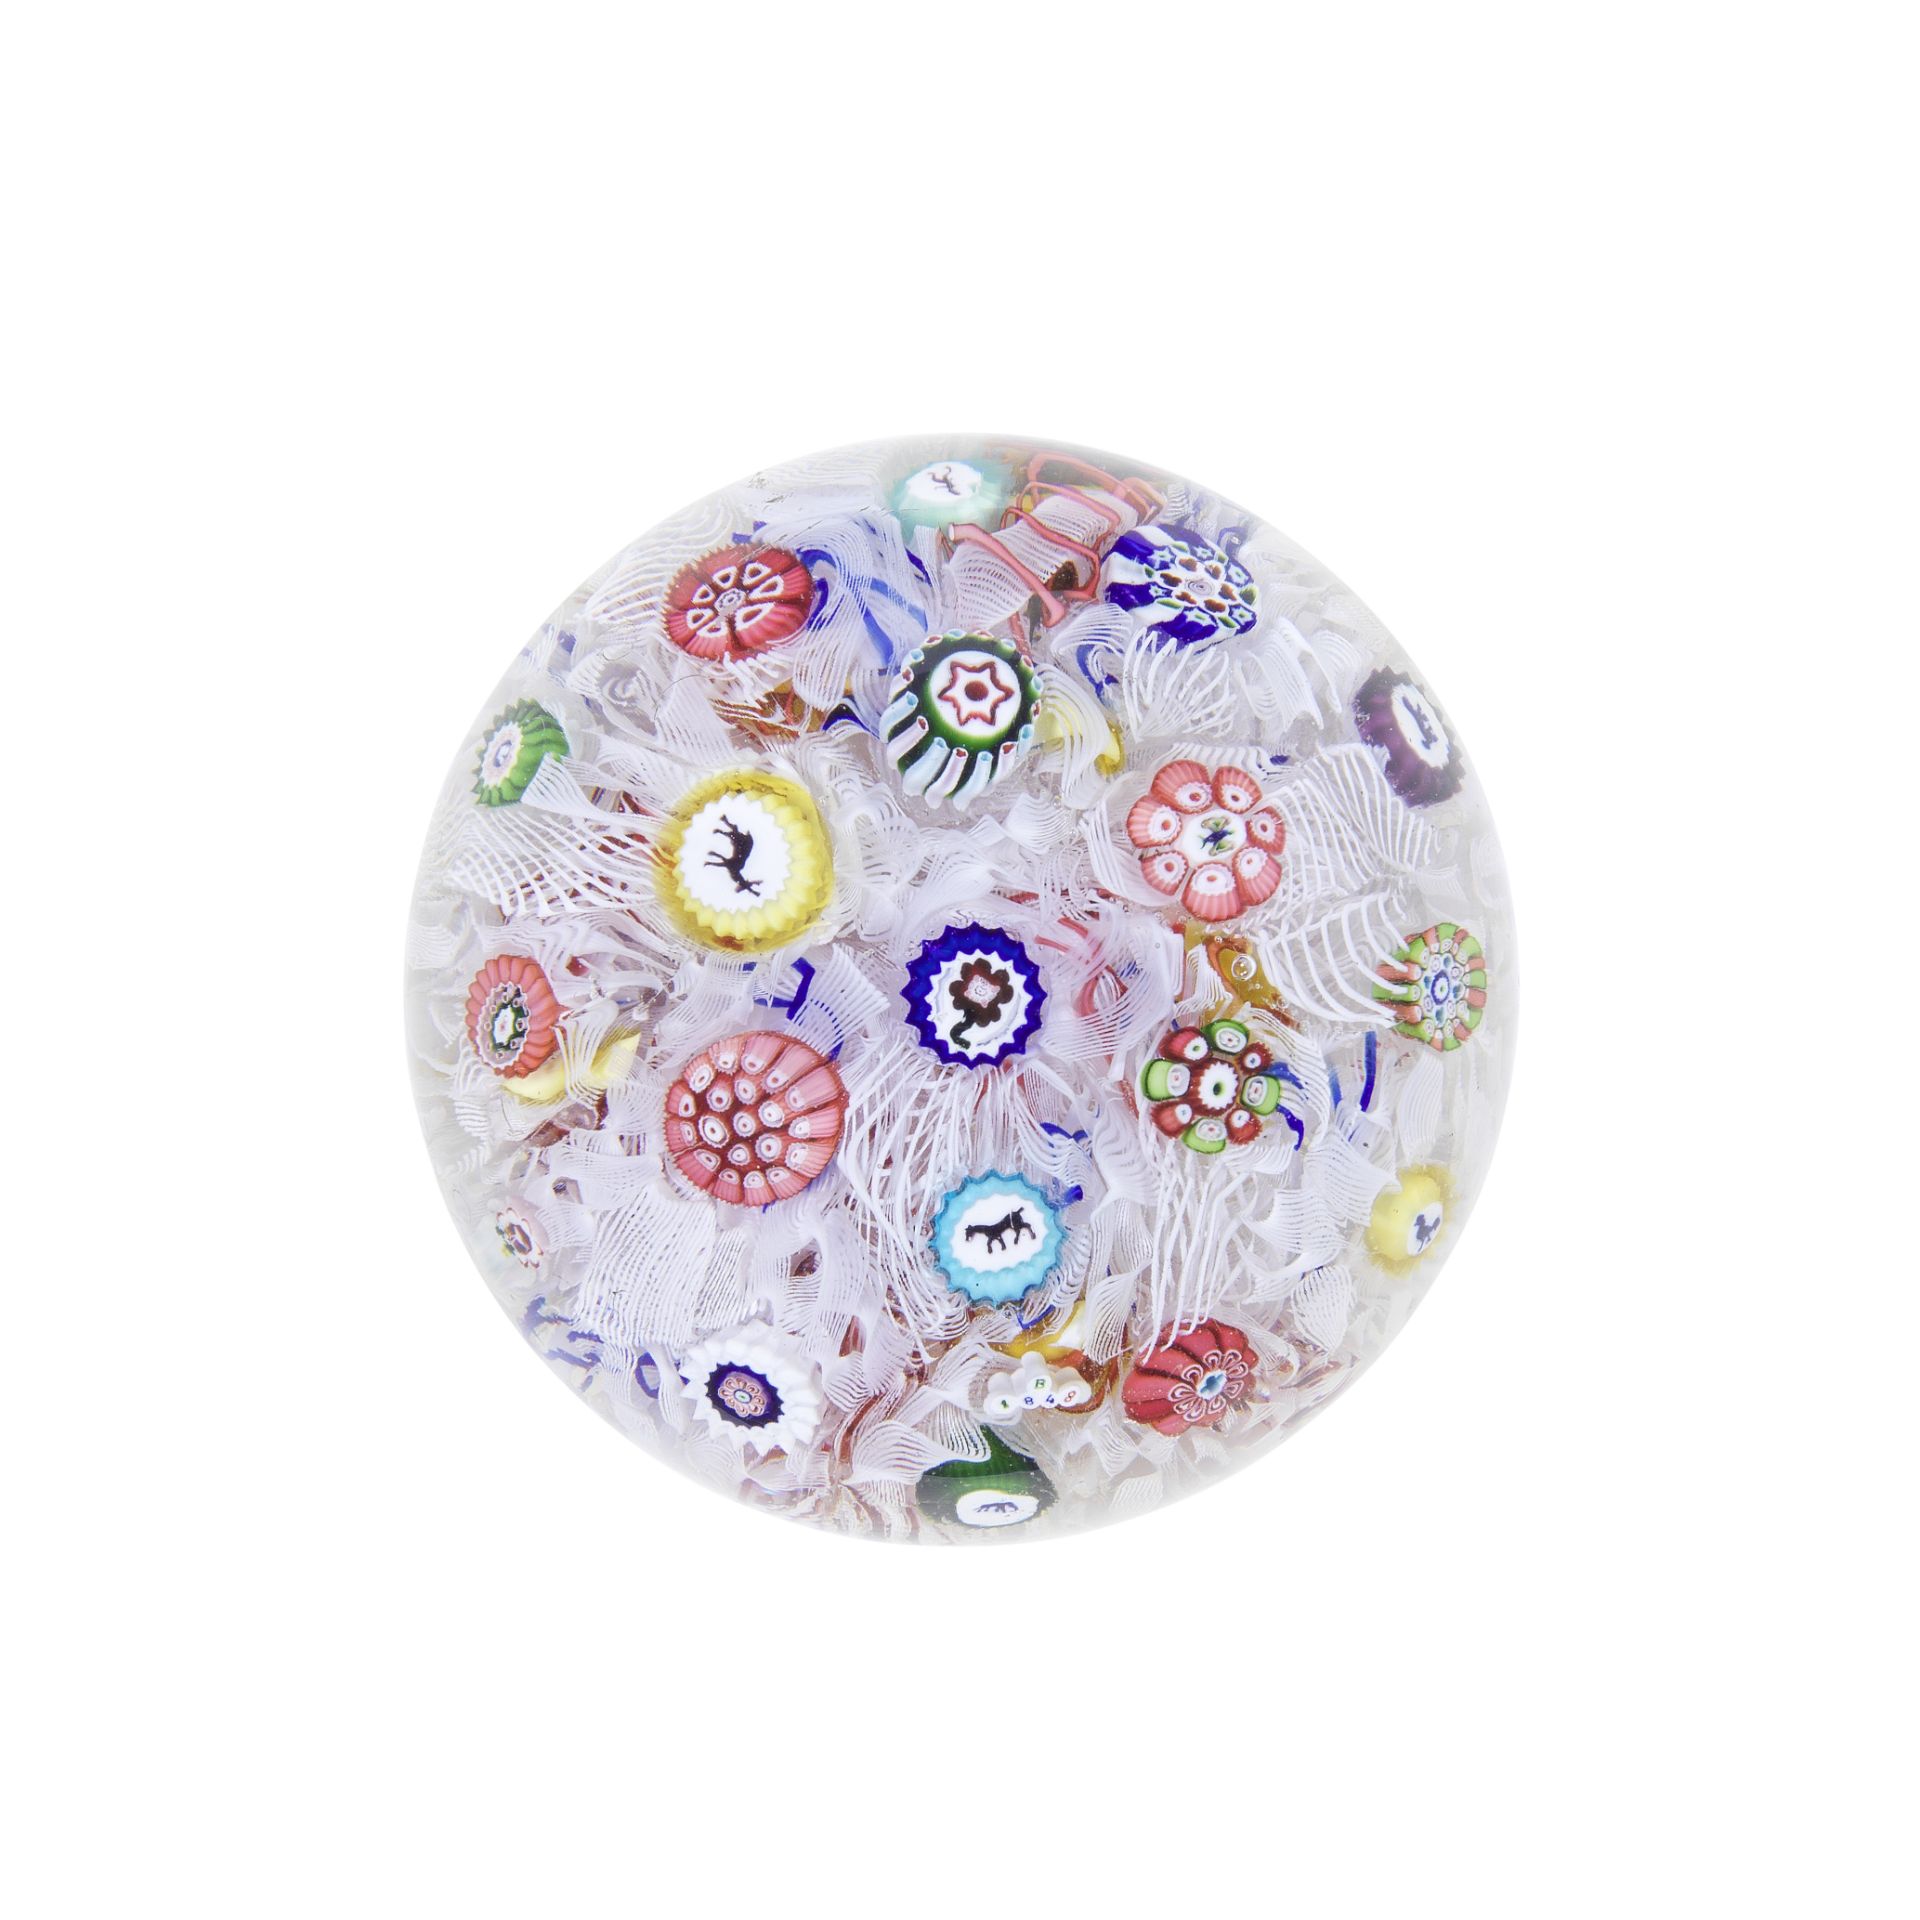 A Baccarat spaced millefiori paperweight, dated 1848